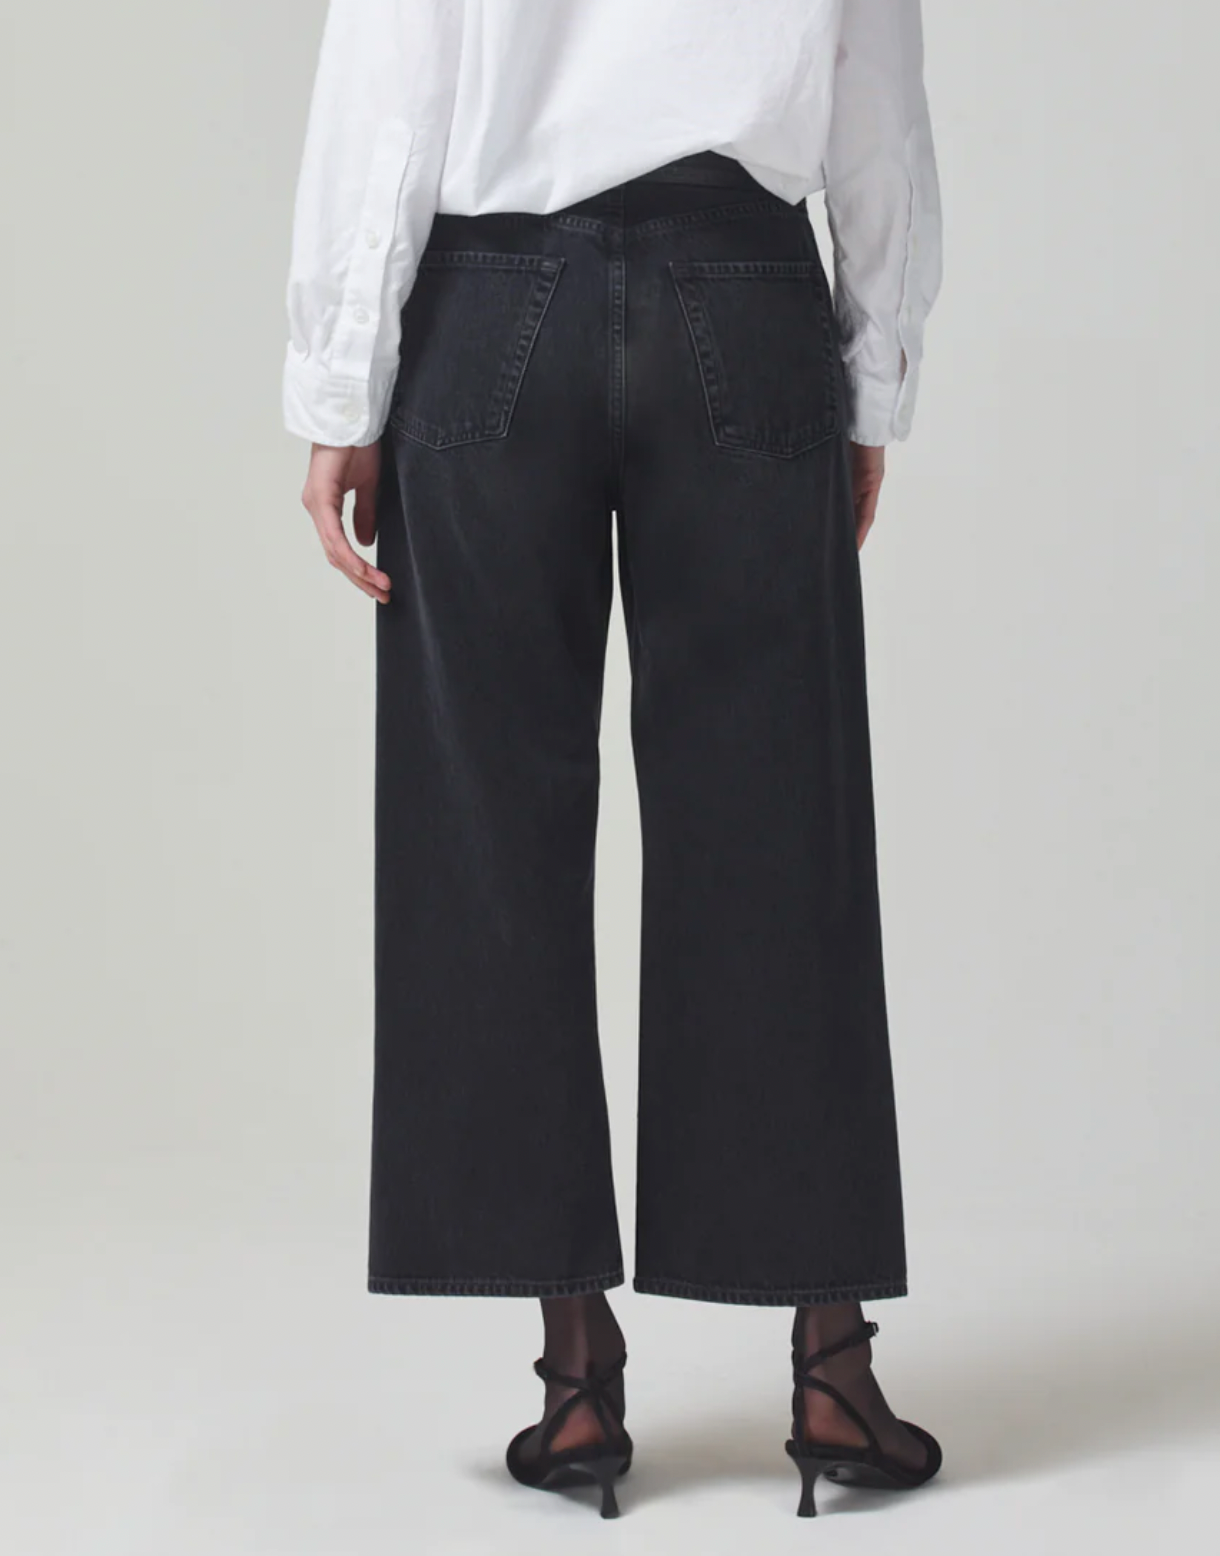 CITIZENS OF HUMANITY GAUCHO VINTAGE WIDE LEG